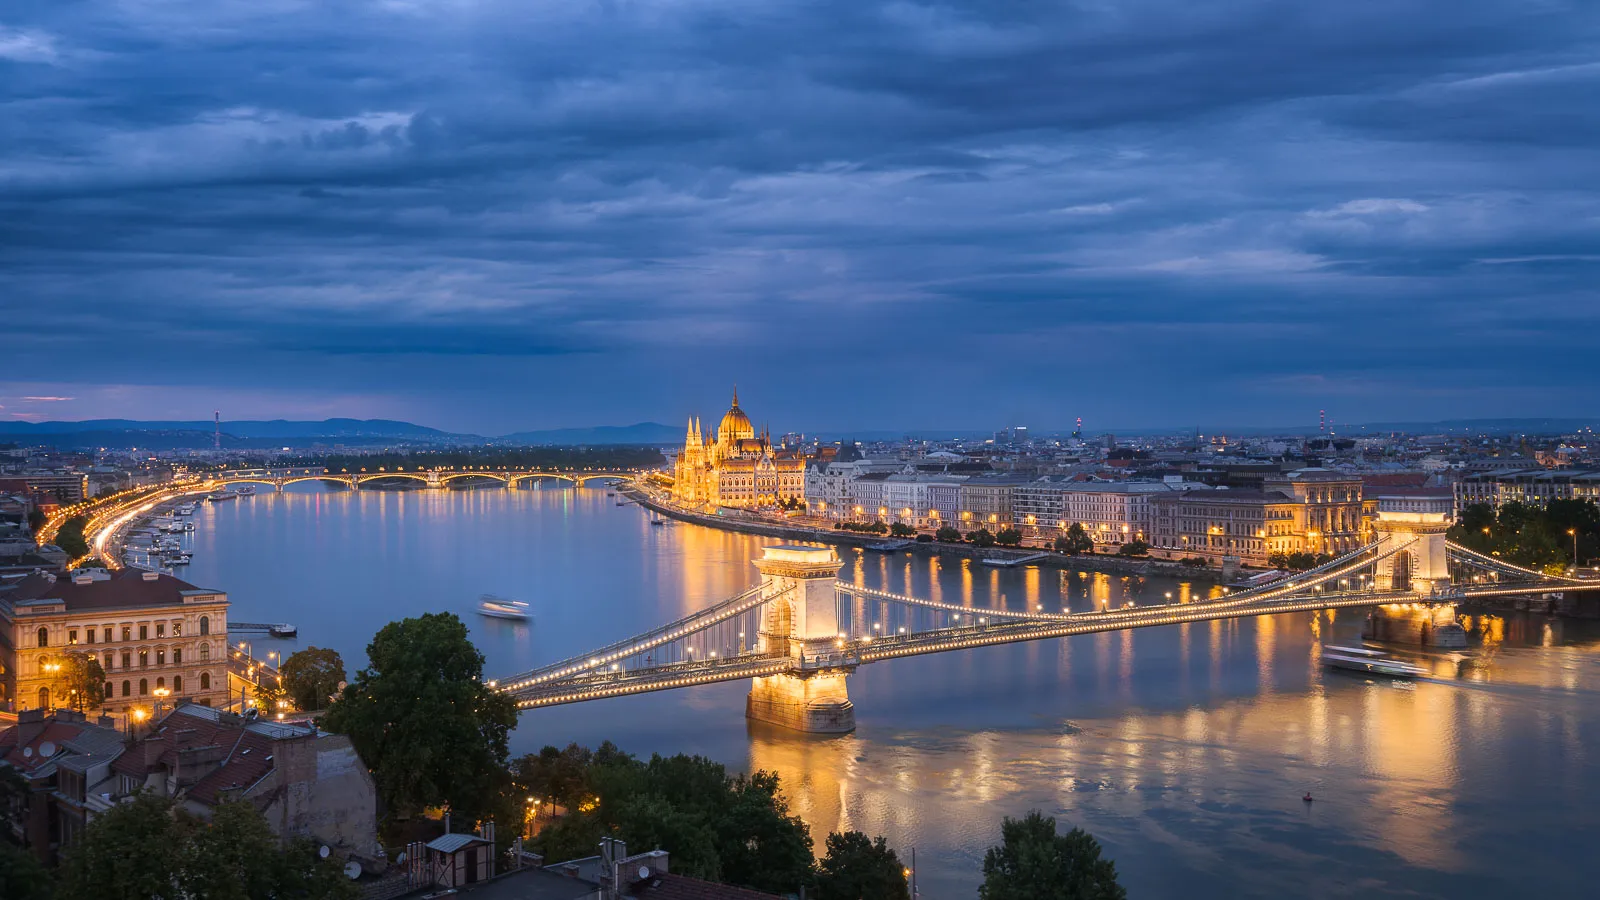 A spectacular view of Budapest at blue hour. The Hungarian Parliament and the Chain Bridge are the best illuminated landmarks in the city.